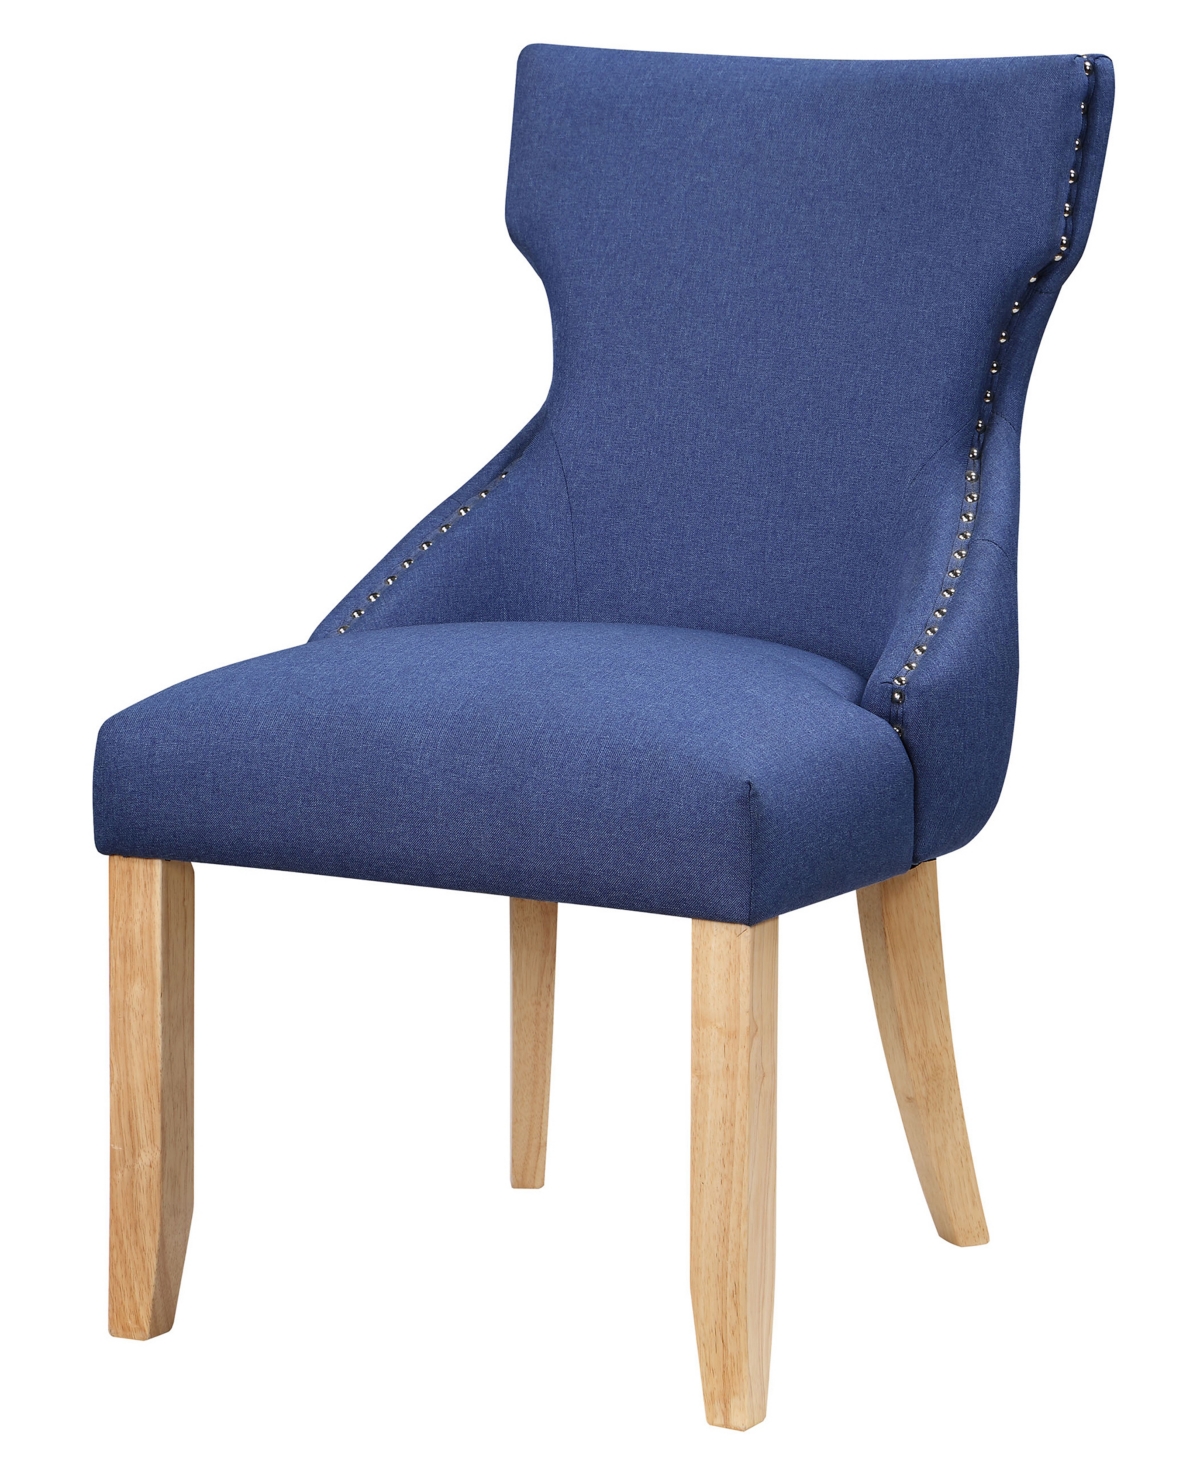 Furniture Of America Allia Tufted Wingback Side Chair 2 Piece Set In Blue